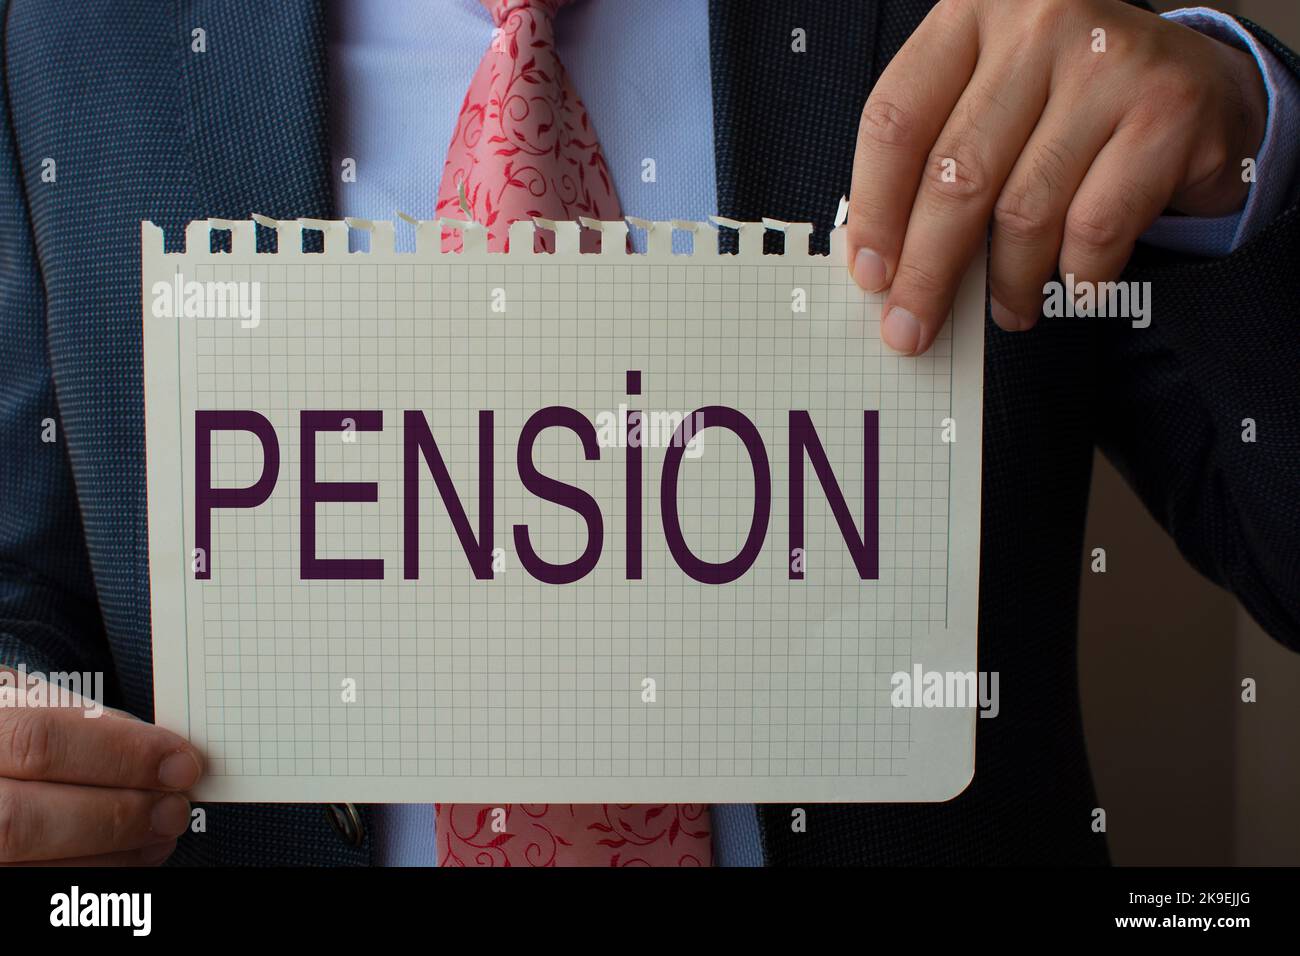 The paper in the hand of the man in the suit reads ''pension''. Stock Photo